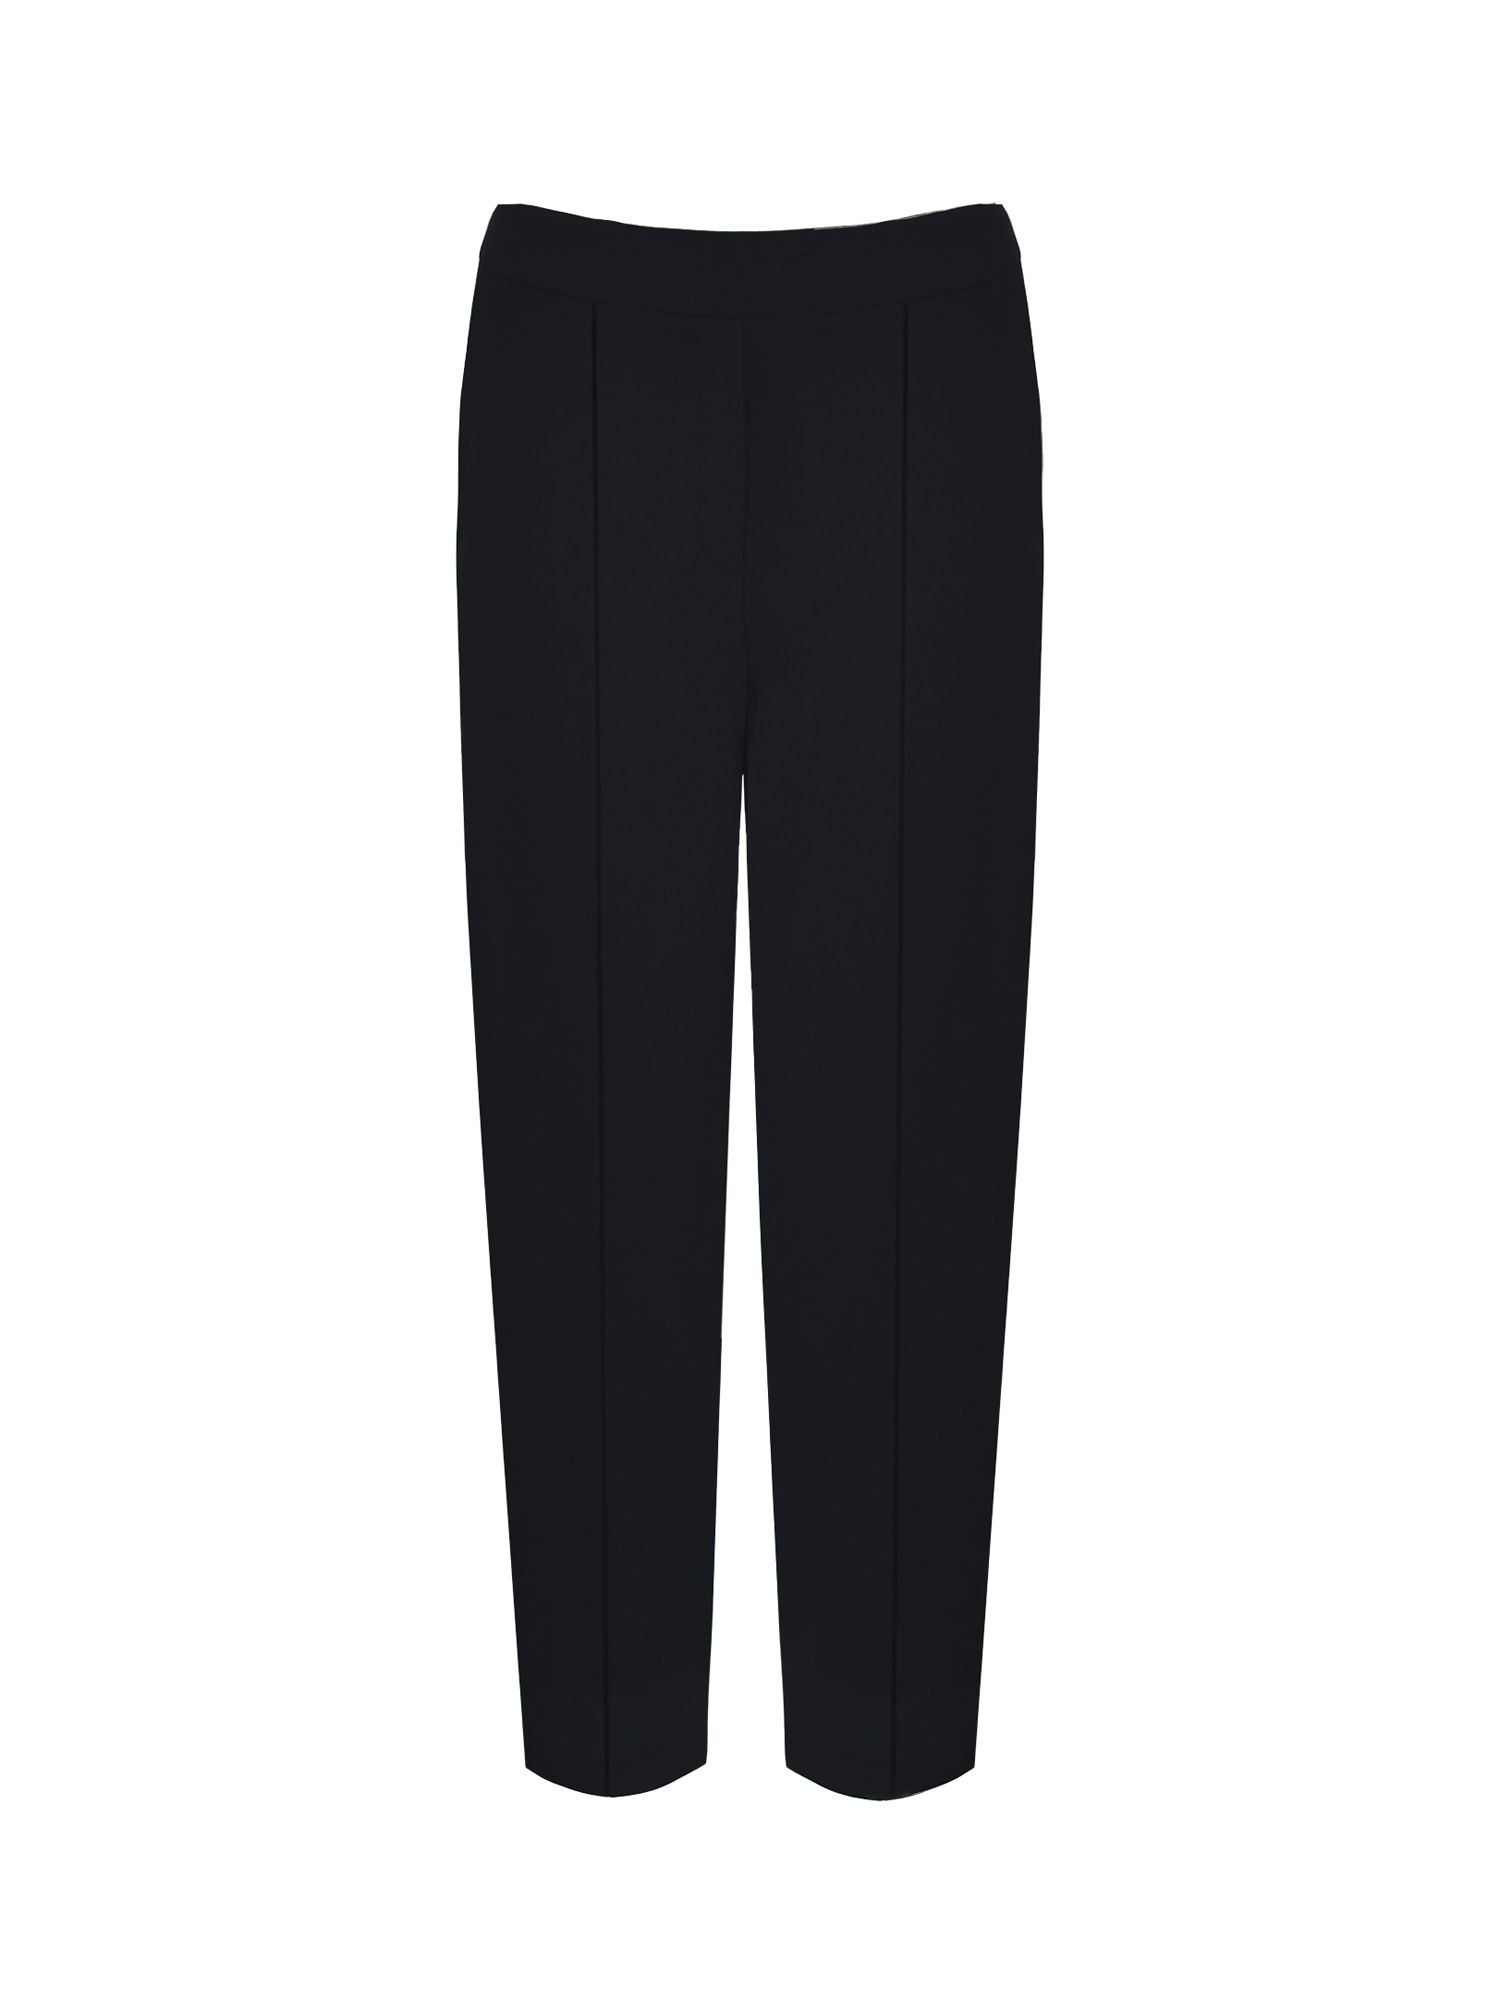 Live Unlimited Curve Petite Stretch Tapered Trousers, Black, 12